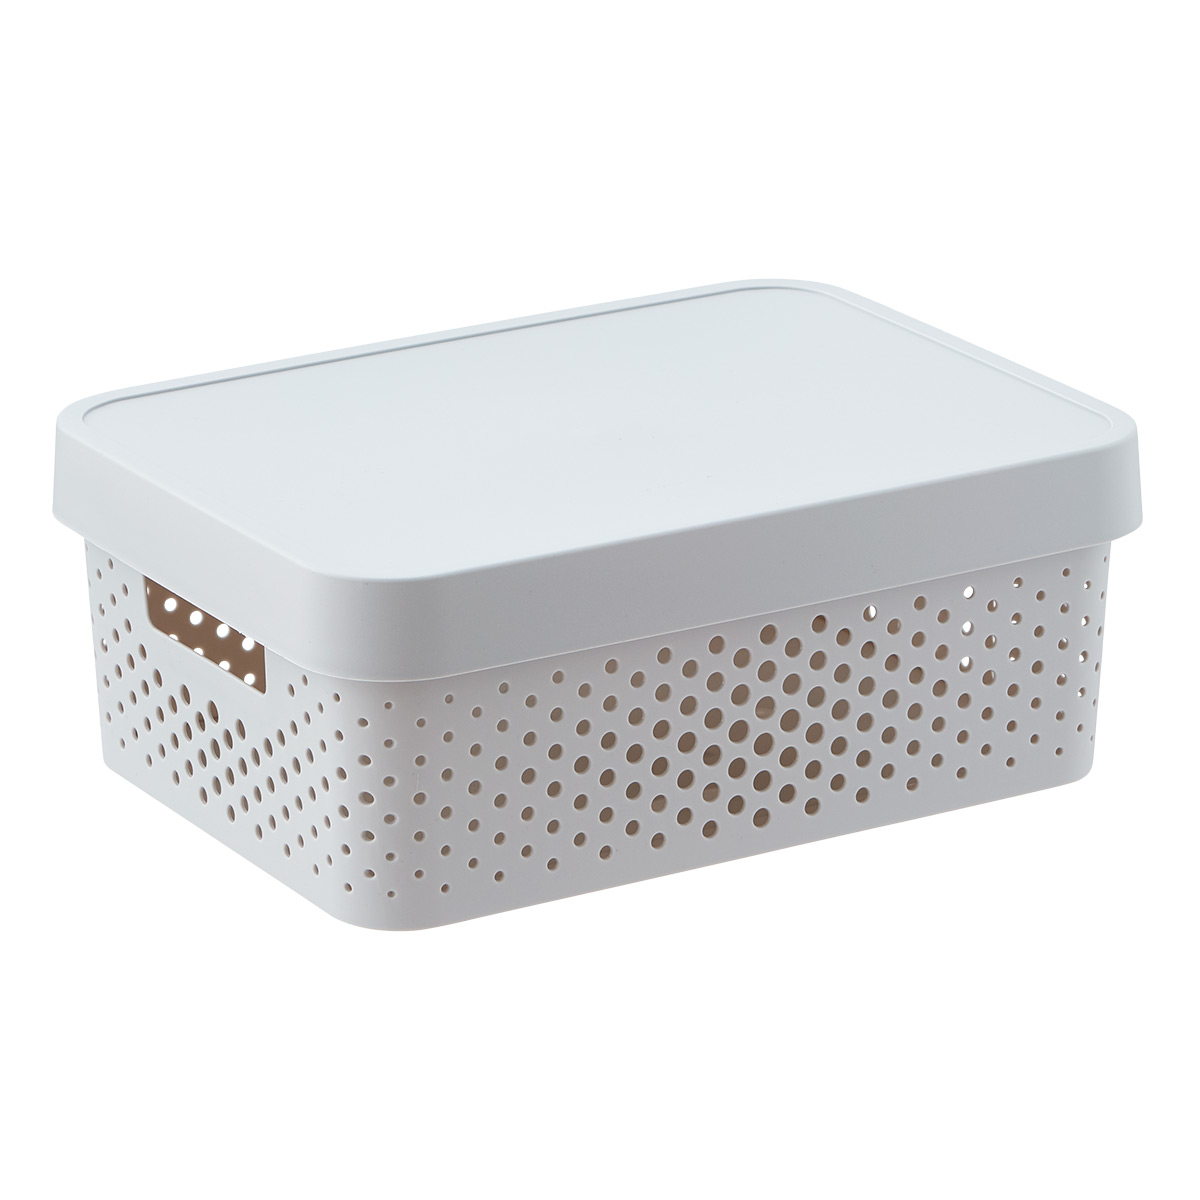 https://www.containerstore.com/catalogimages/388019/10081581-Curver-infinity-plastic-box.jpg